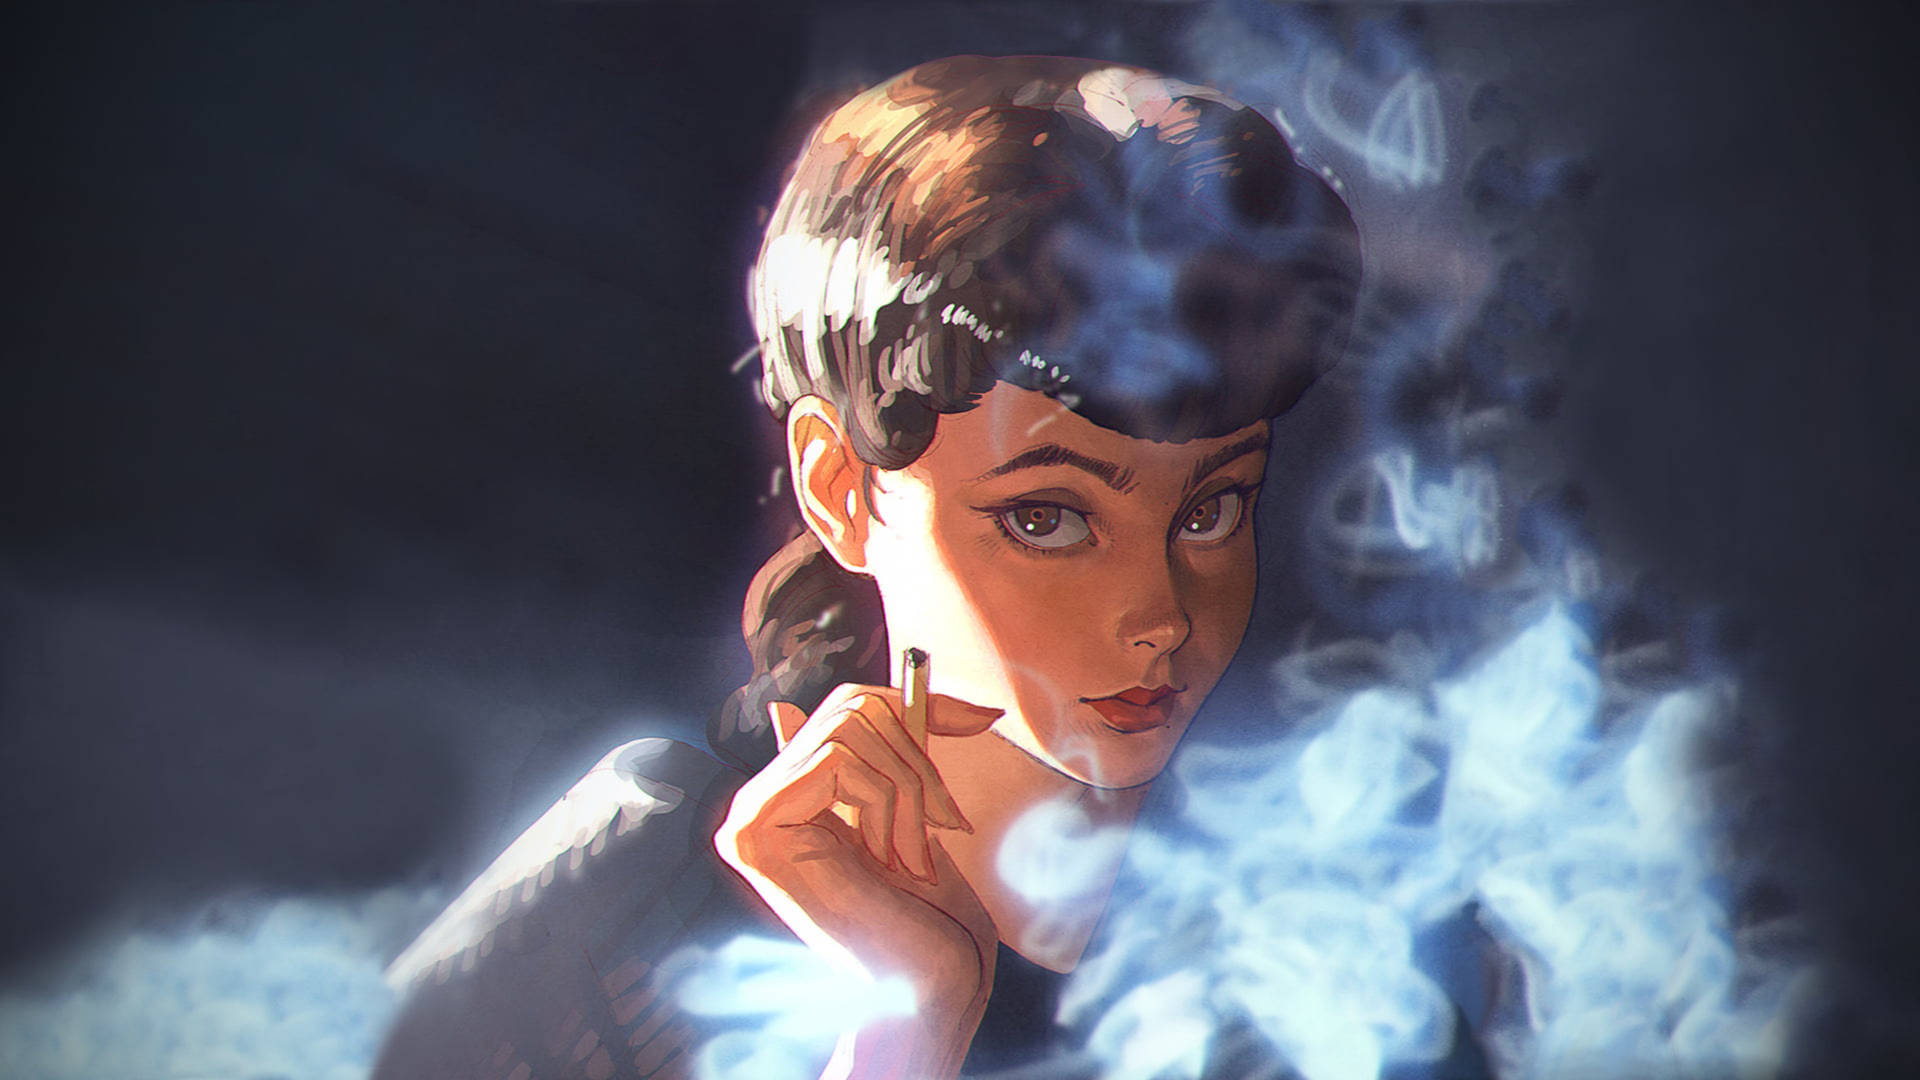 5120X2880 Blade Runner Wallpaper and Background